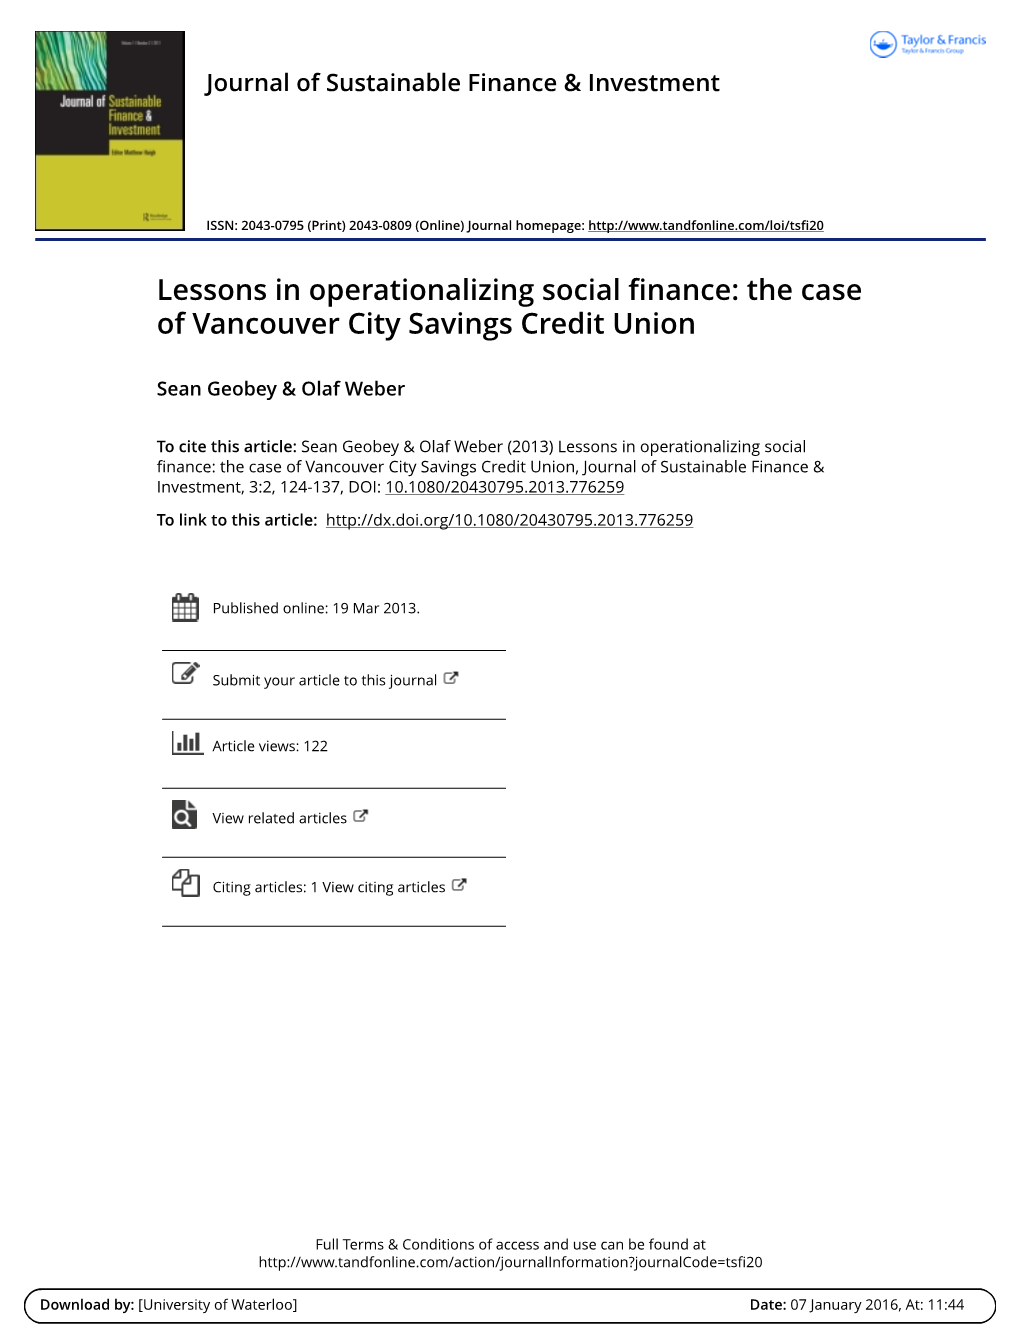 The Case of Vancouver City Savings Credit Union